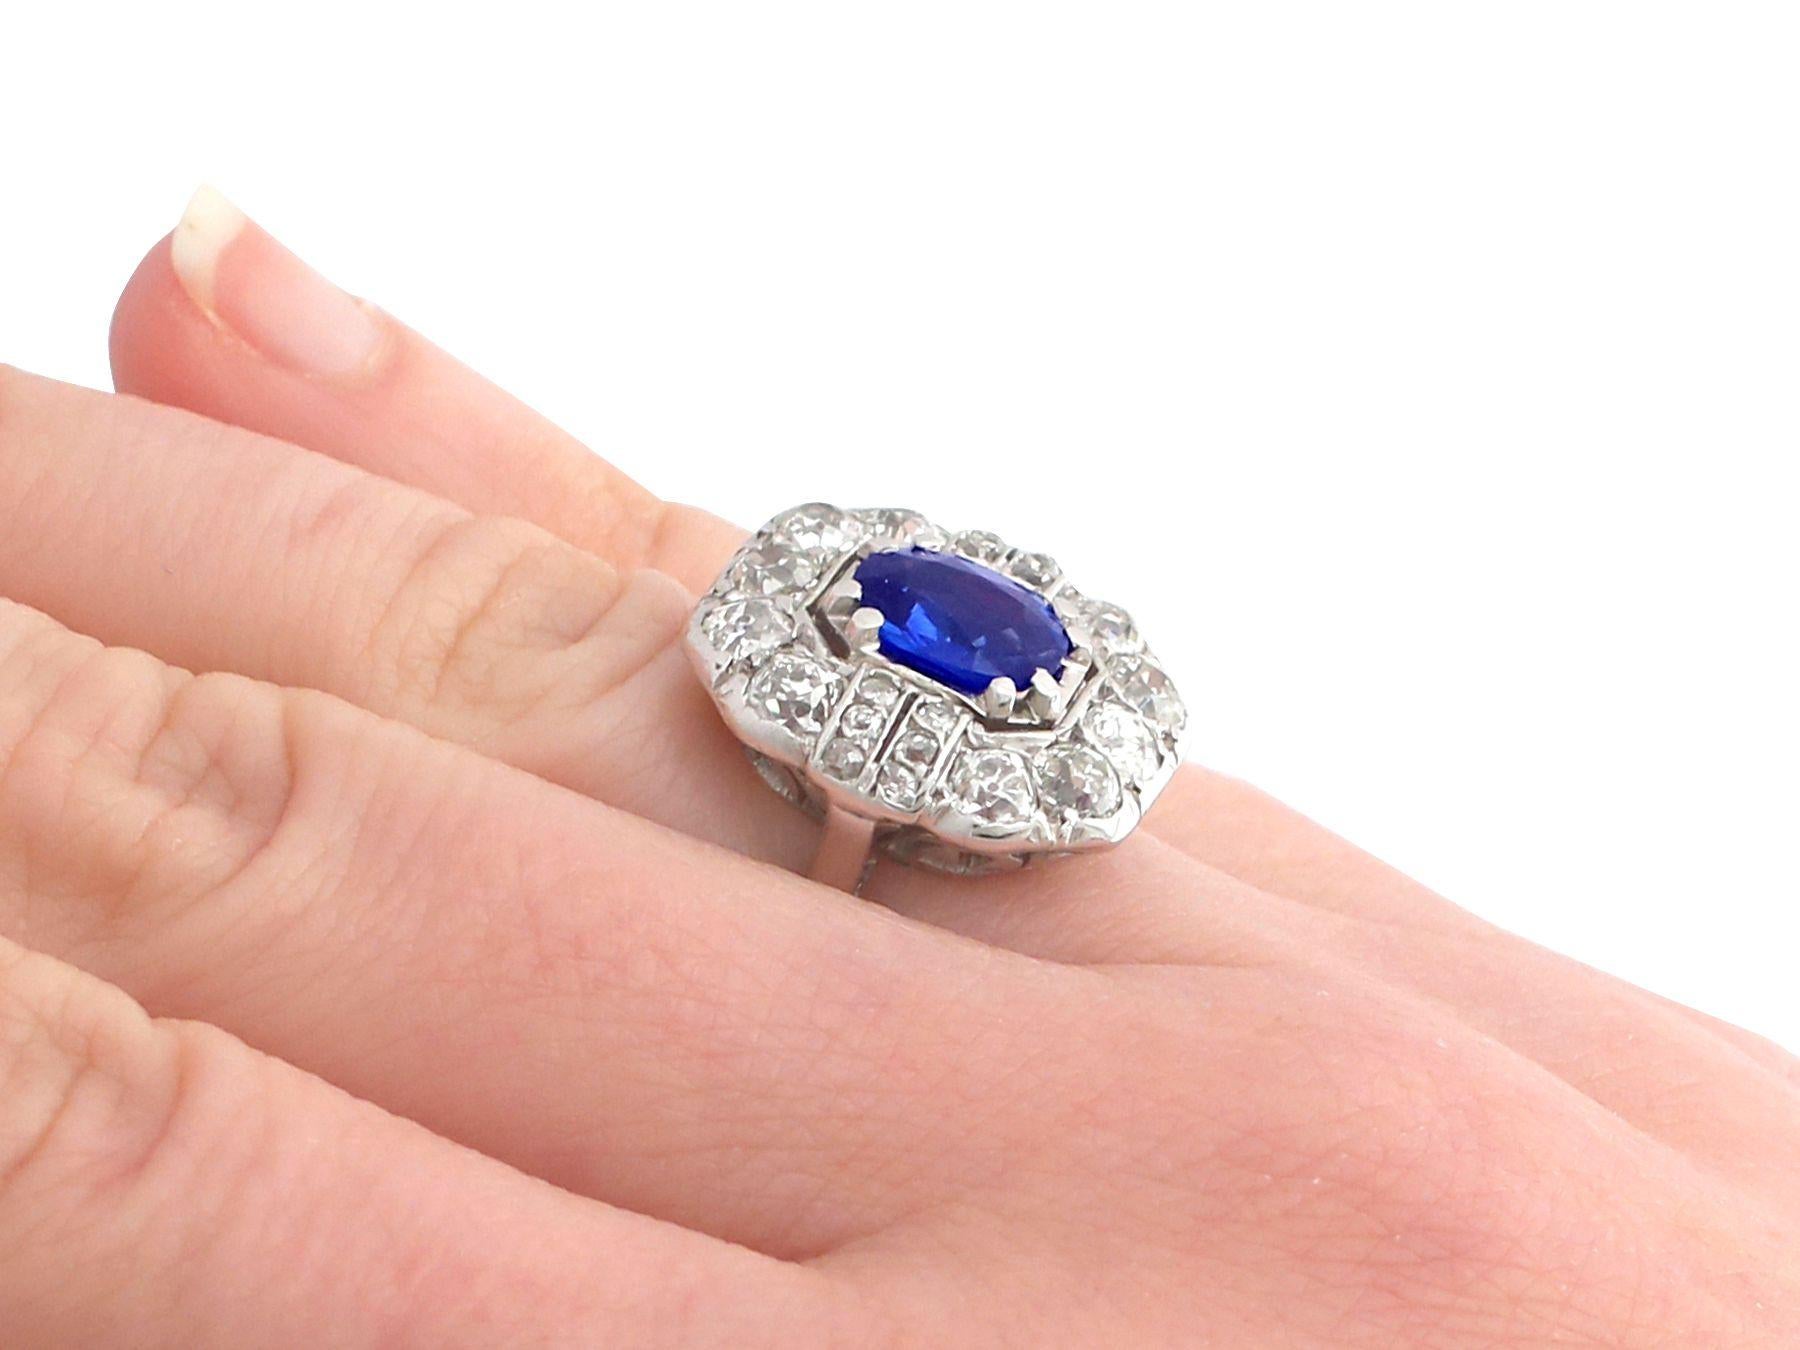 Antique French 2.20 Carat Sapphire and 2.16 Carat Diamond Gold Cluster Ring In Excellent Condition For Sale In Jesmond, Newcastle Upon Tyne